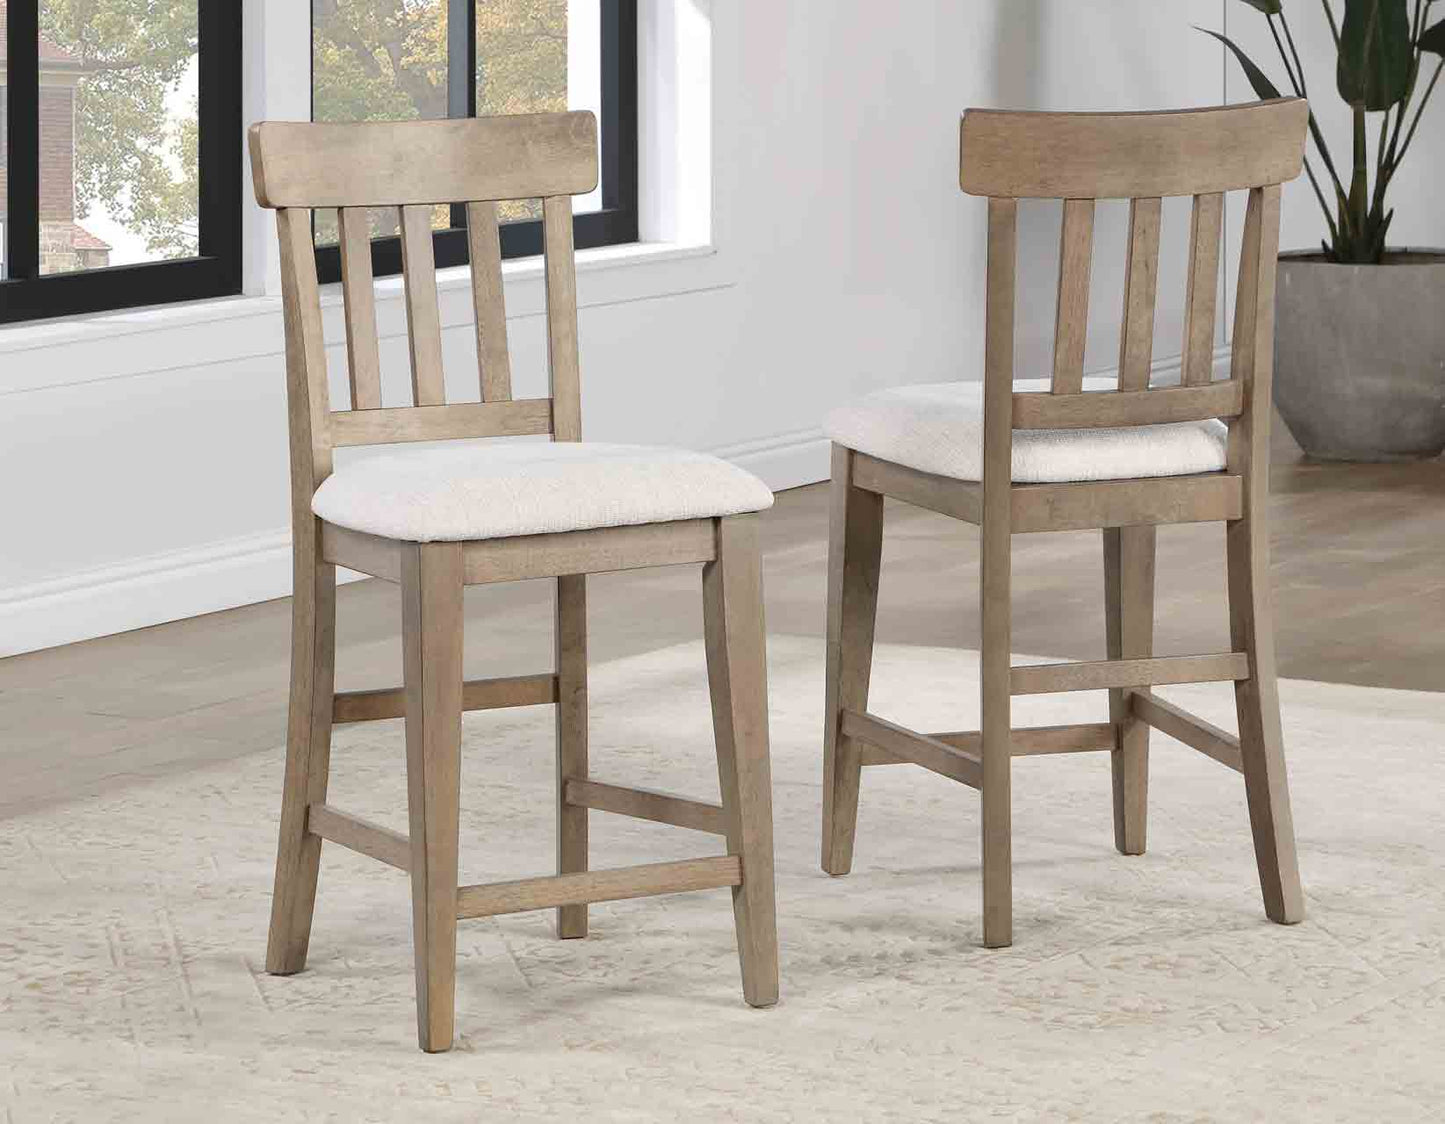 Napa 5-Piece Counter Dining Set, Sand
(Table & 4 Counter Chairs)